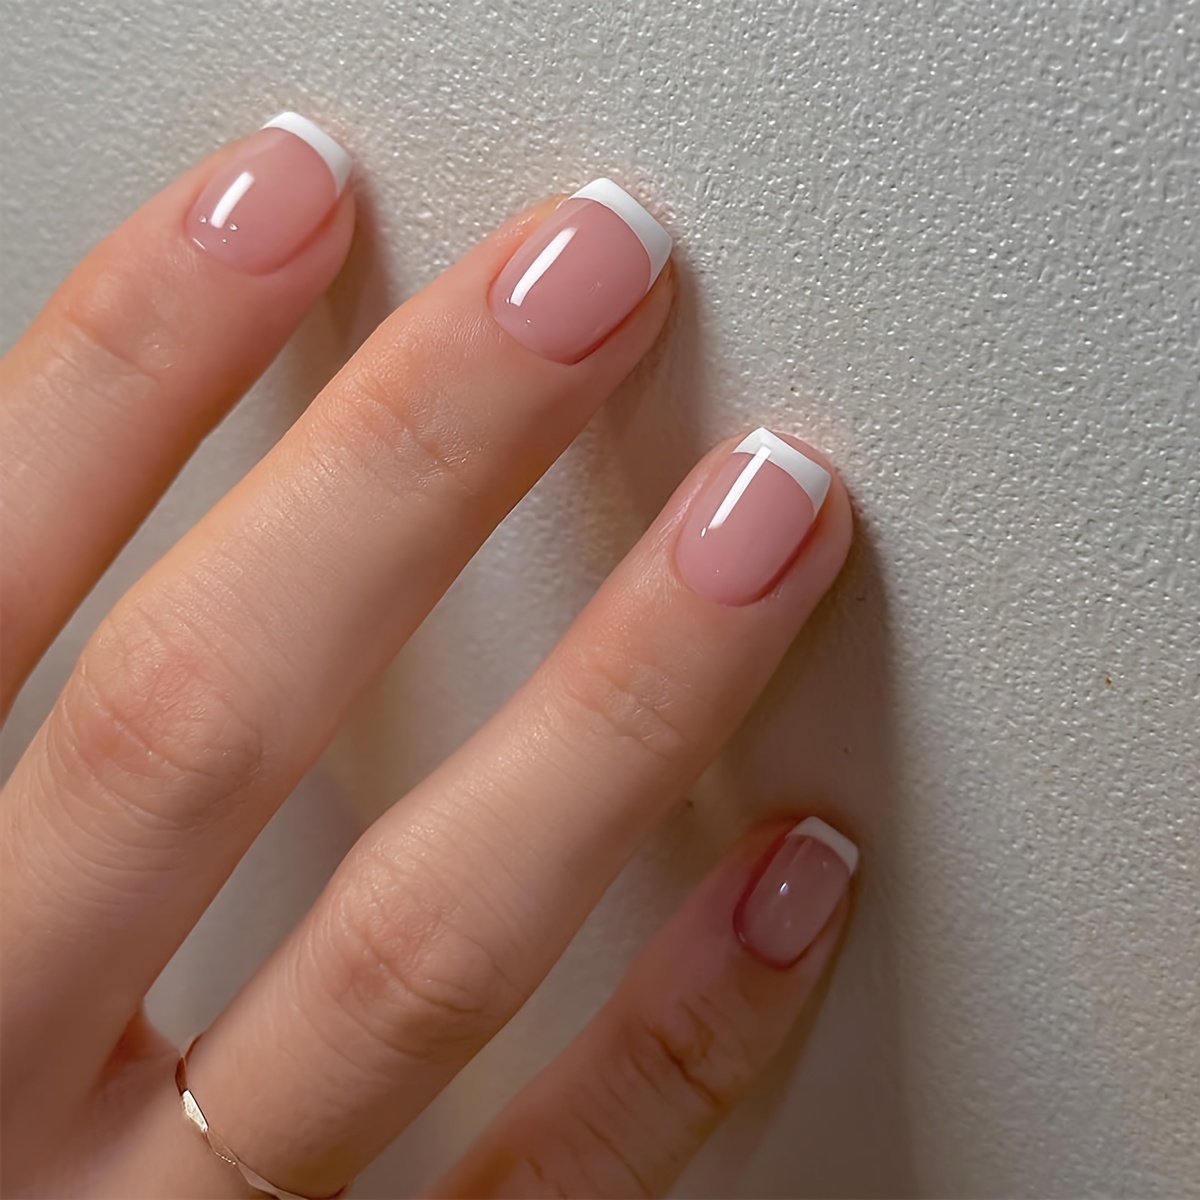 French Chrome nails | French nails, Wedding nails, French manicure nails